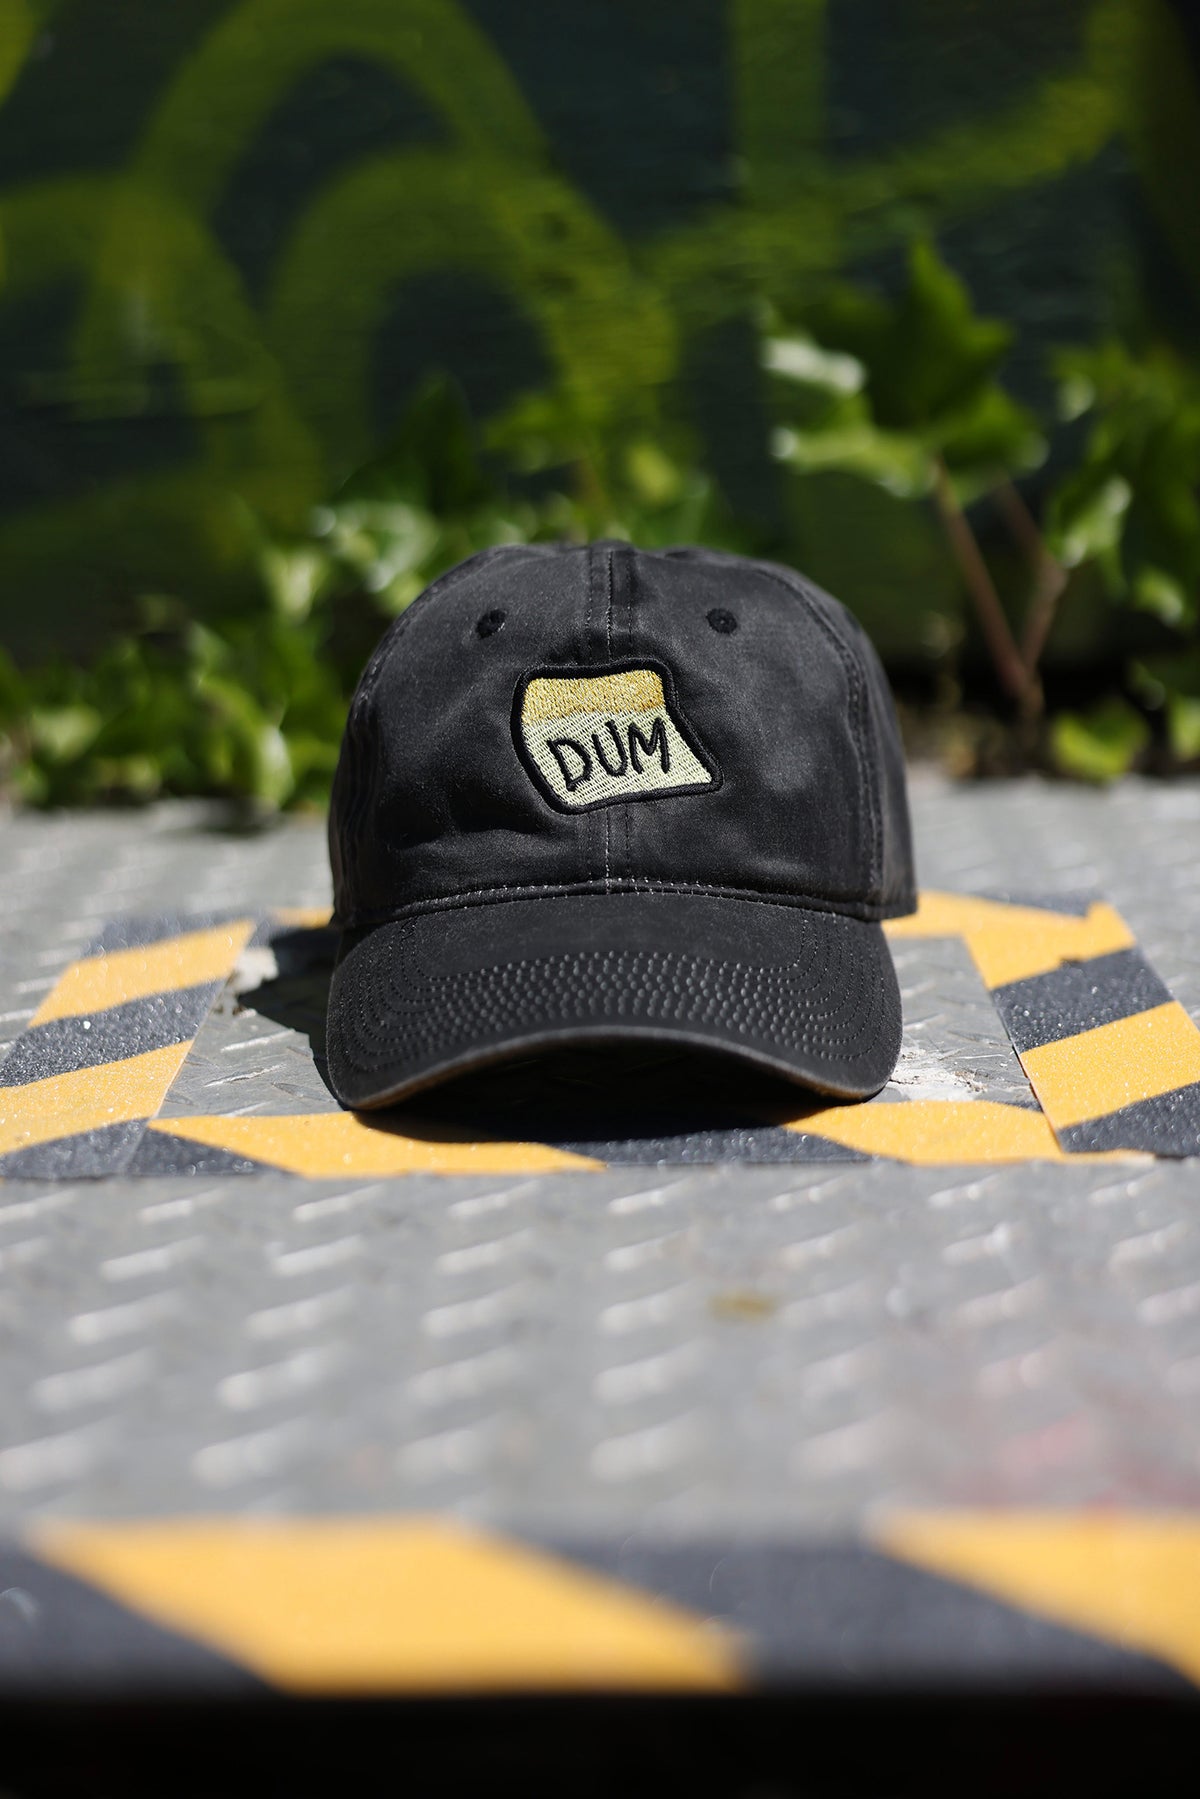 A close up photograph of the black DUM hat on a metal grate in front of a graffitied wall background.